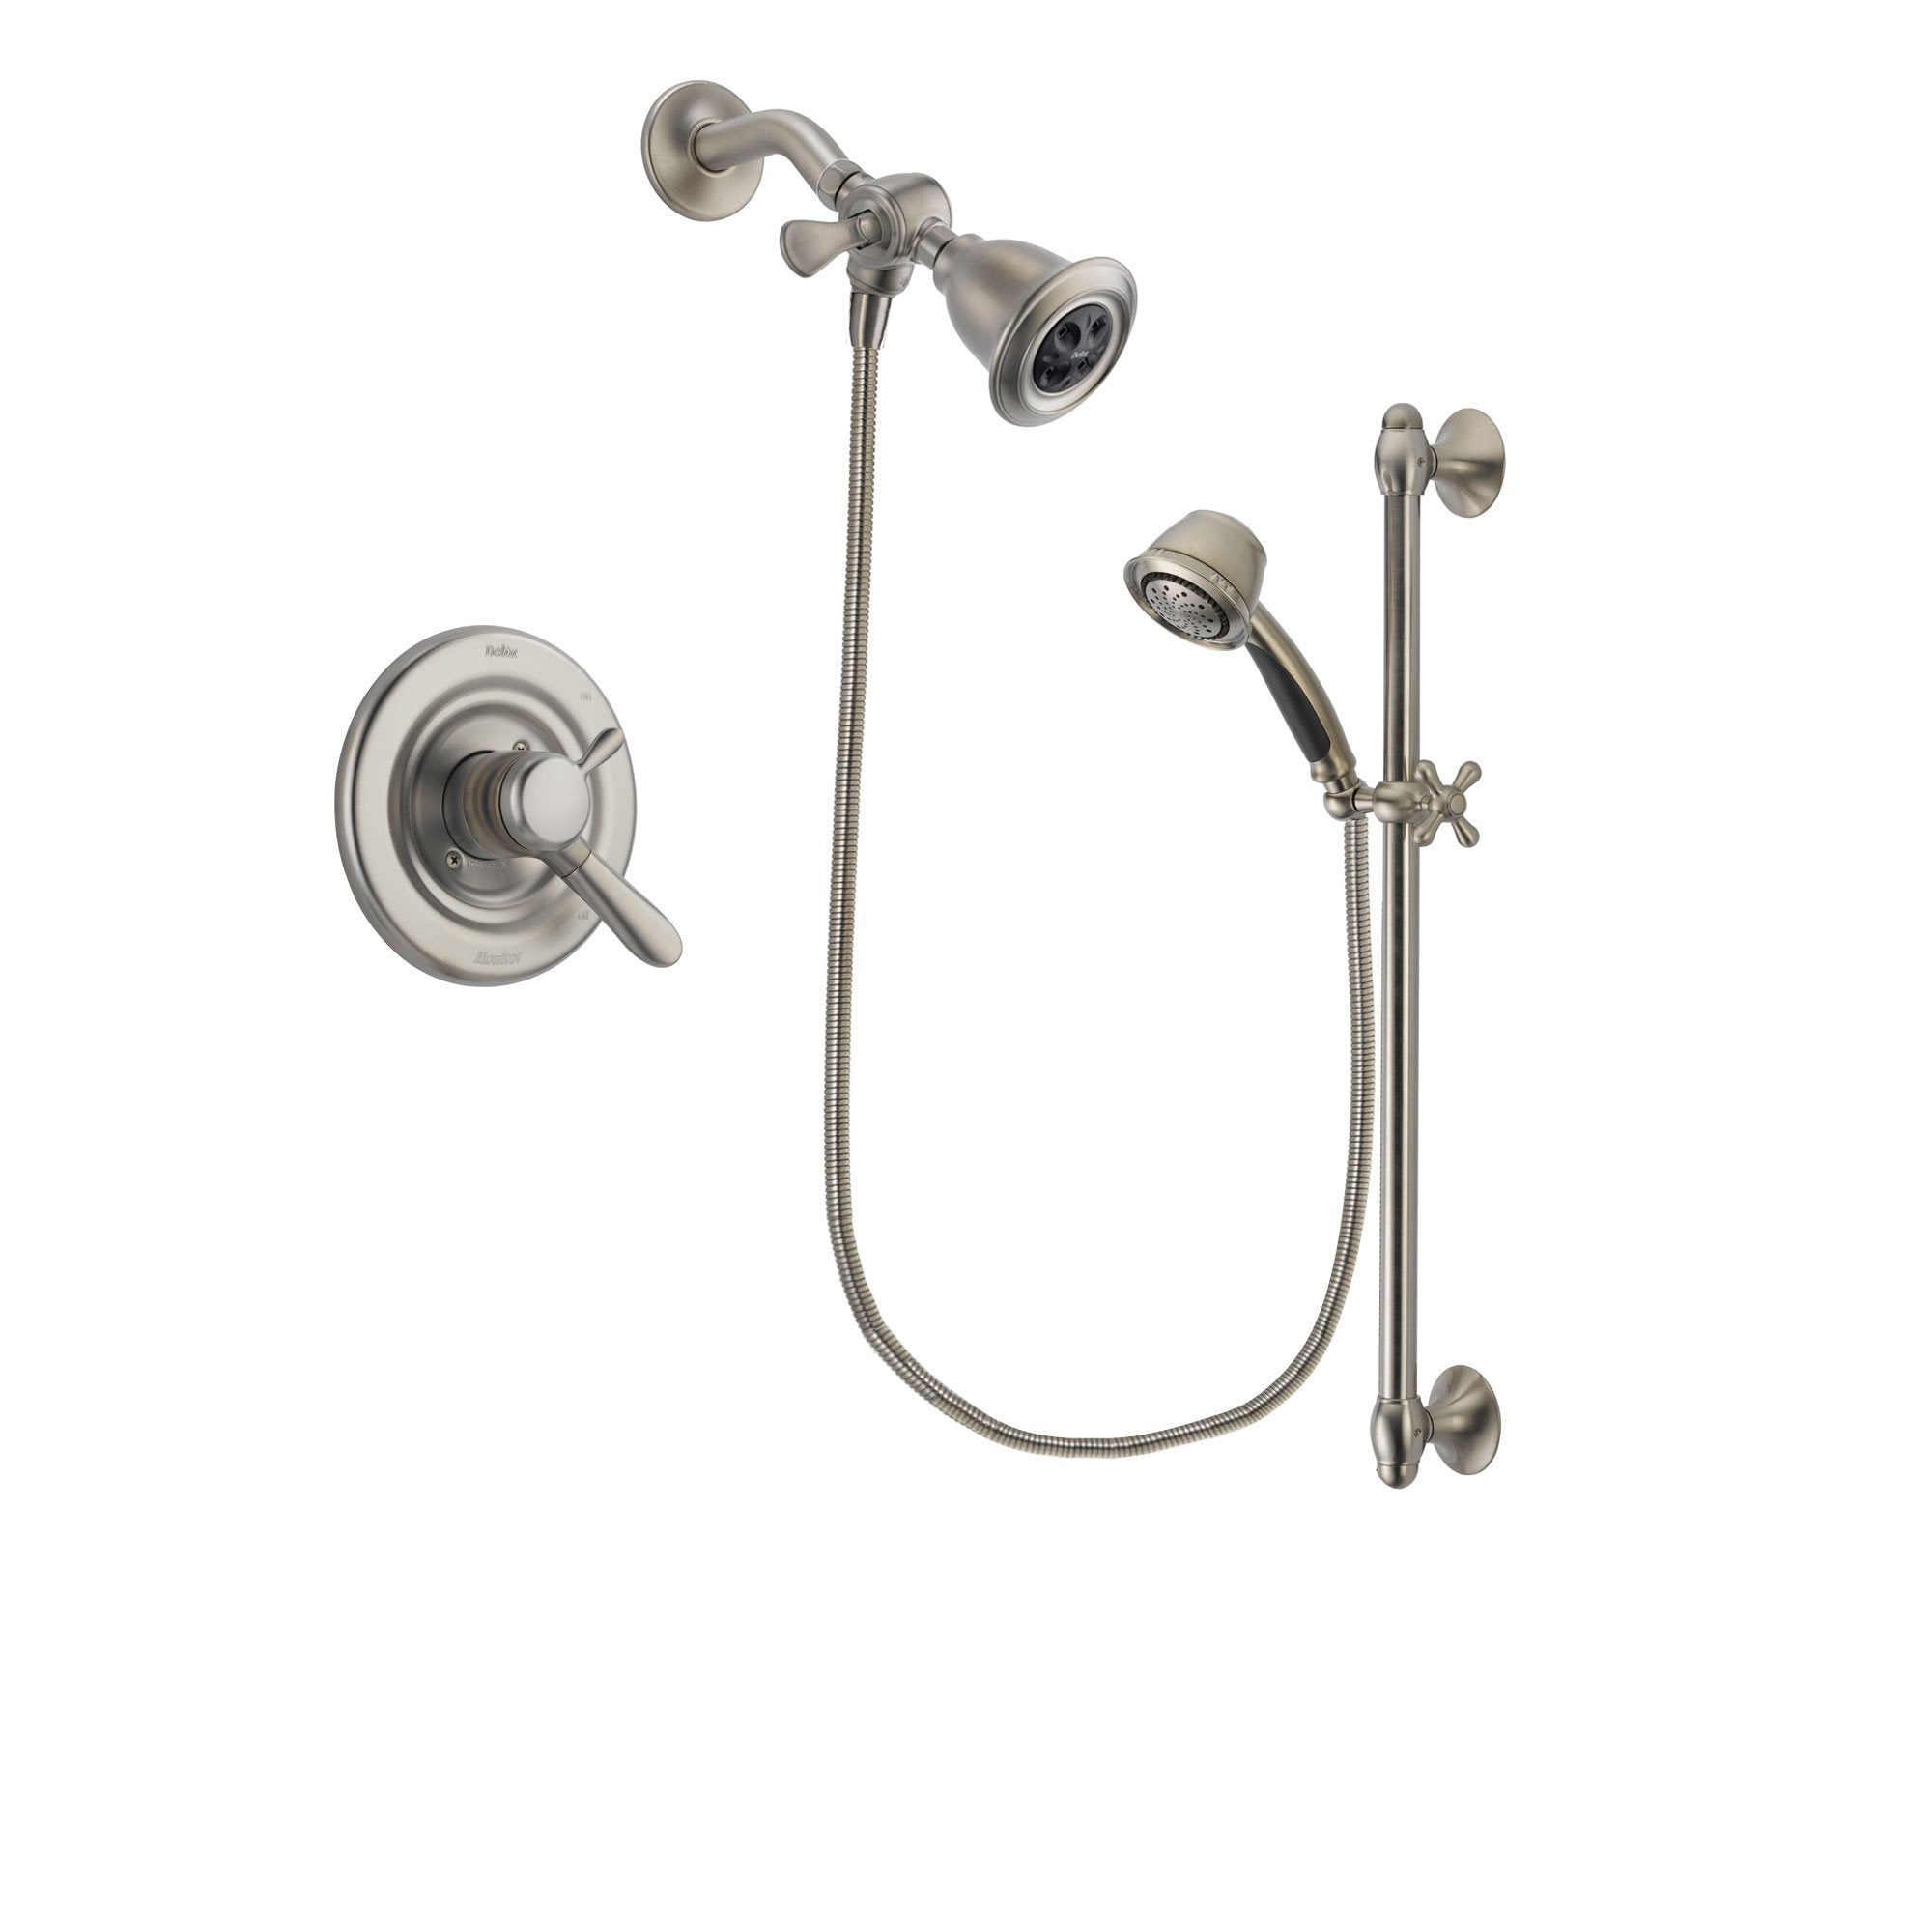 Delta Lahara Stainless Steel Finish Dual Control Shower Faucet System Package with Water Efficient Showerhead and 5-Spray Personal Handshower with Slide Bar Includes Rough-in Valve DSP1296V